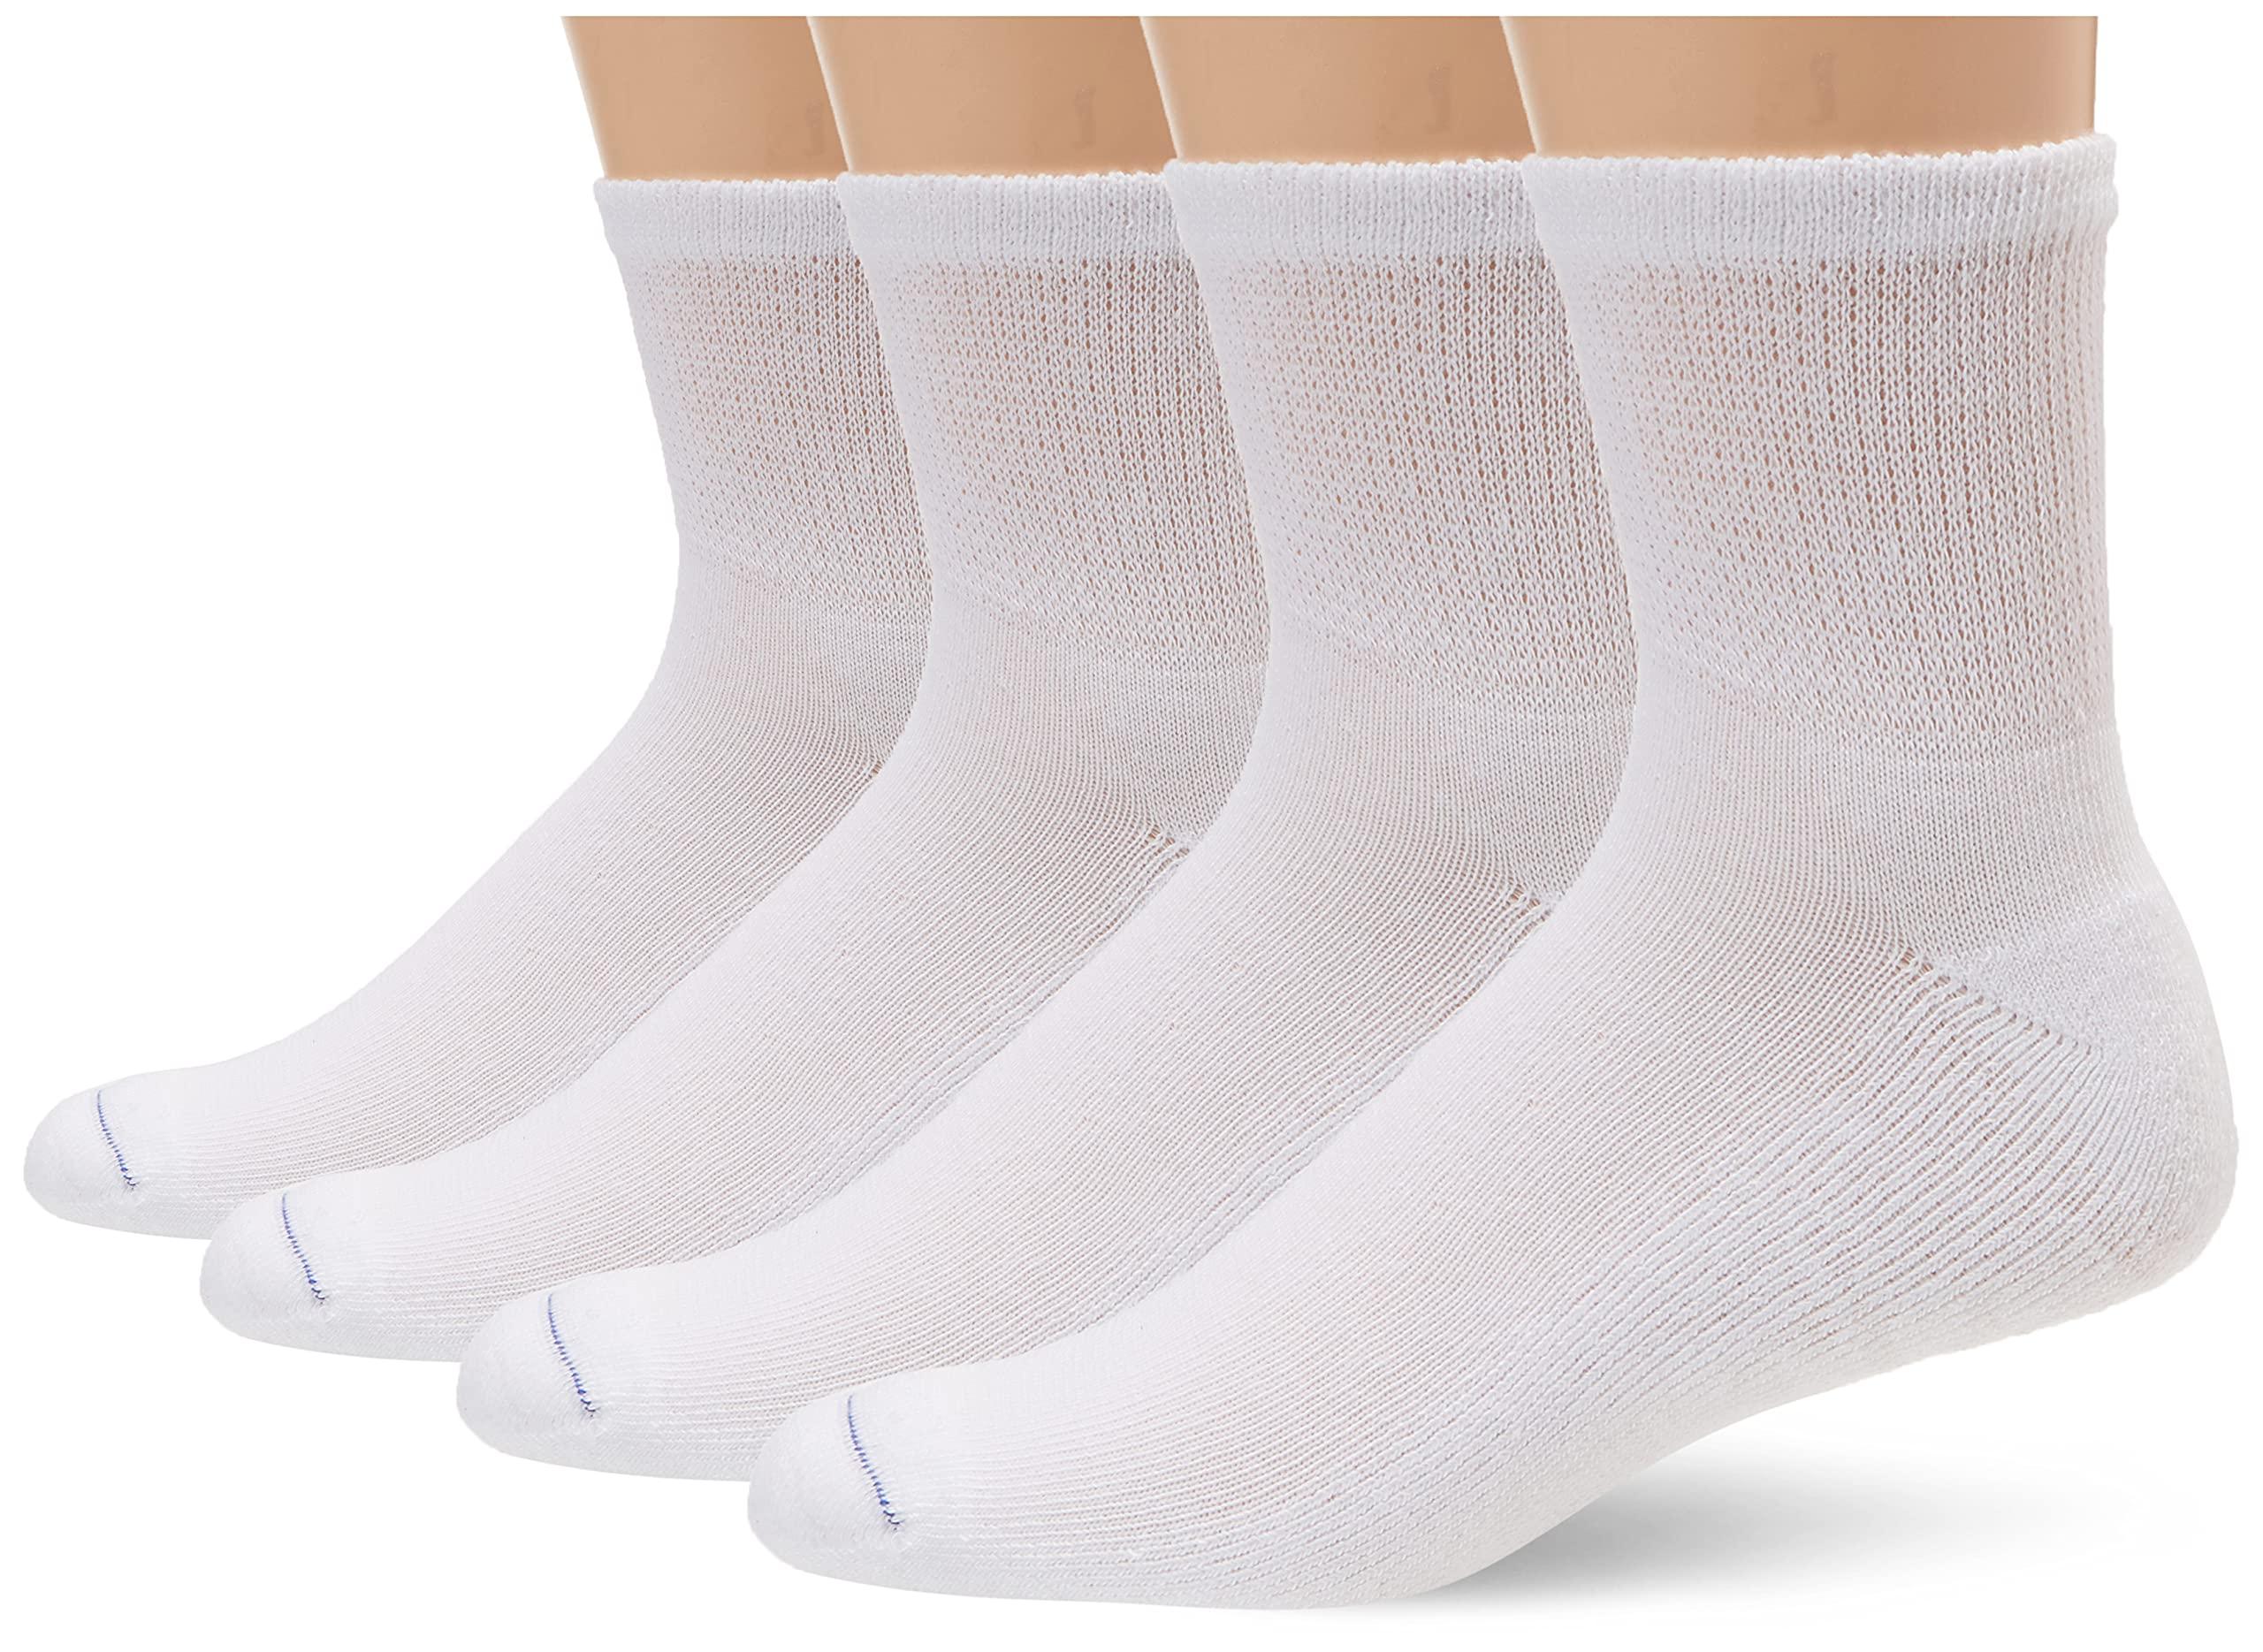 Dr. Scholls 4 Pack Diabetic And Circulatory Non Binding Ankle Socks in ...